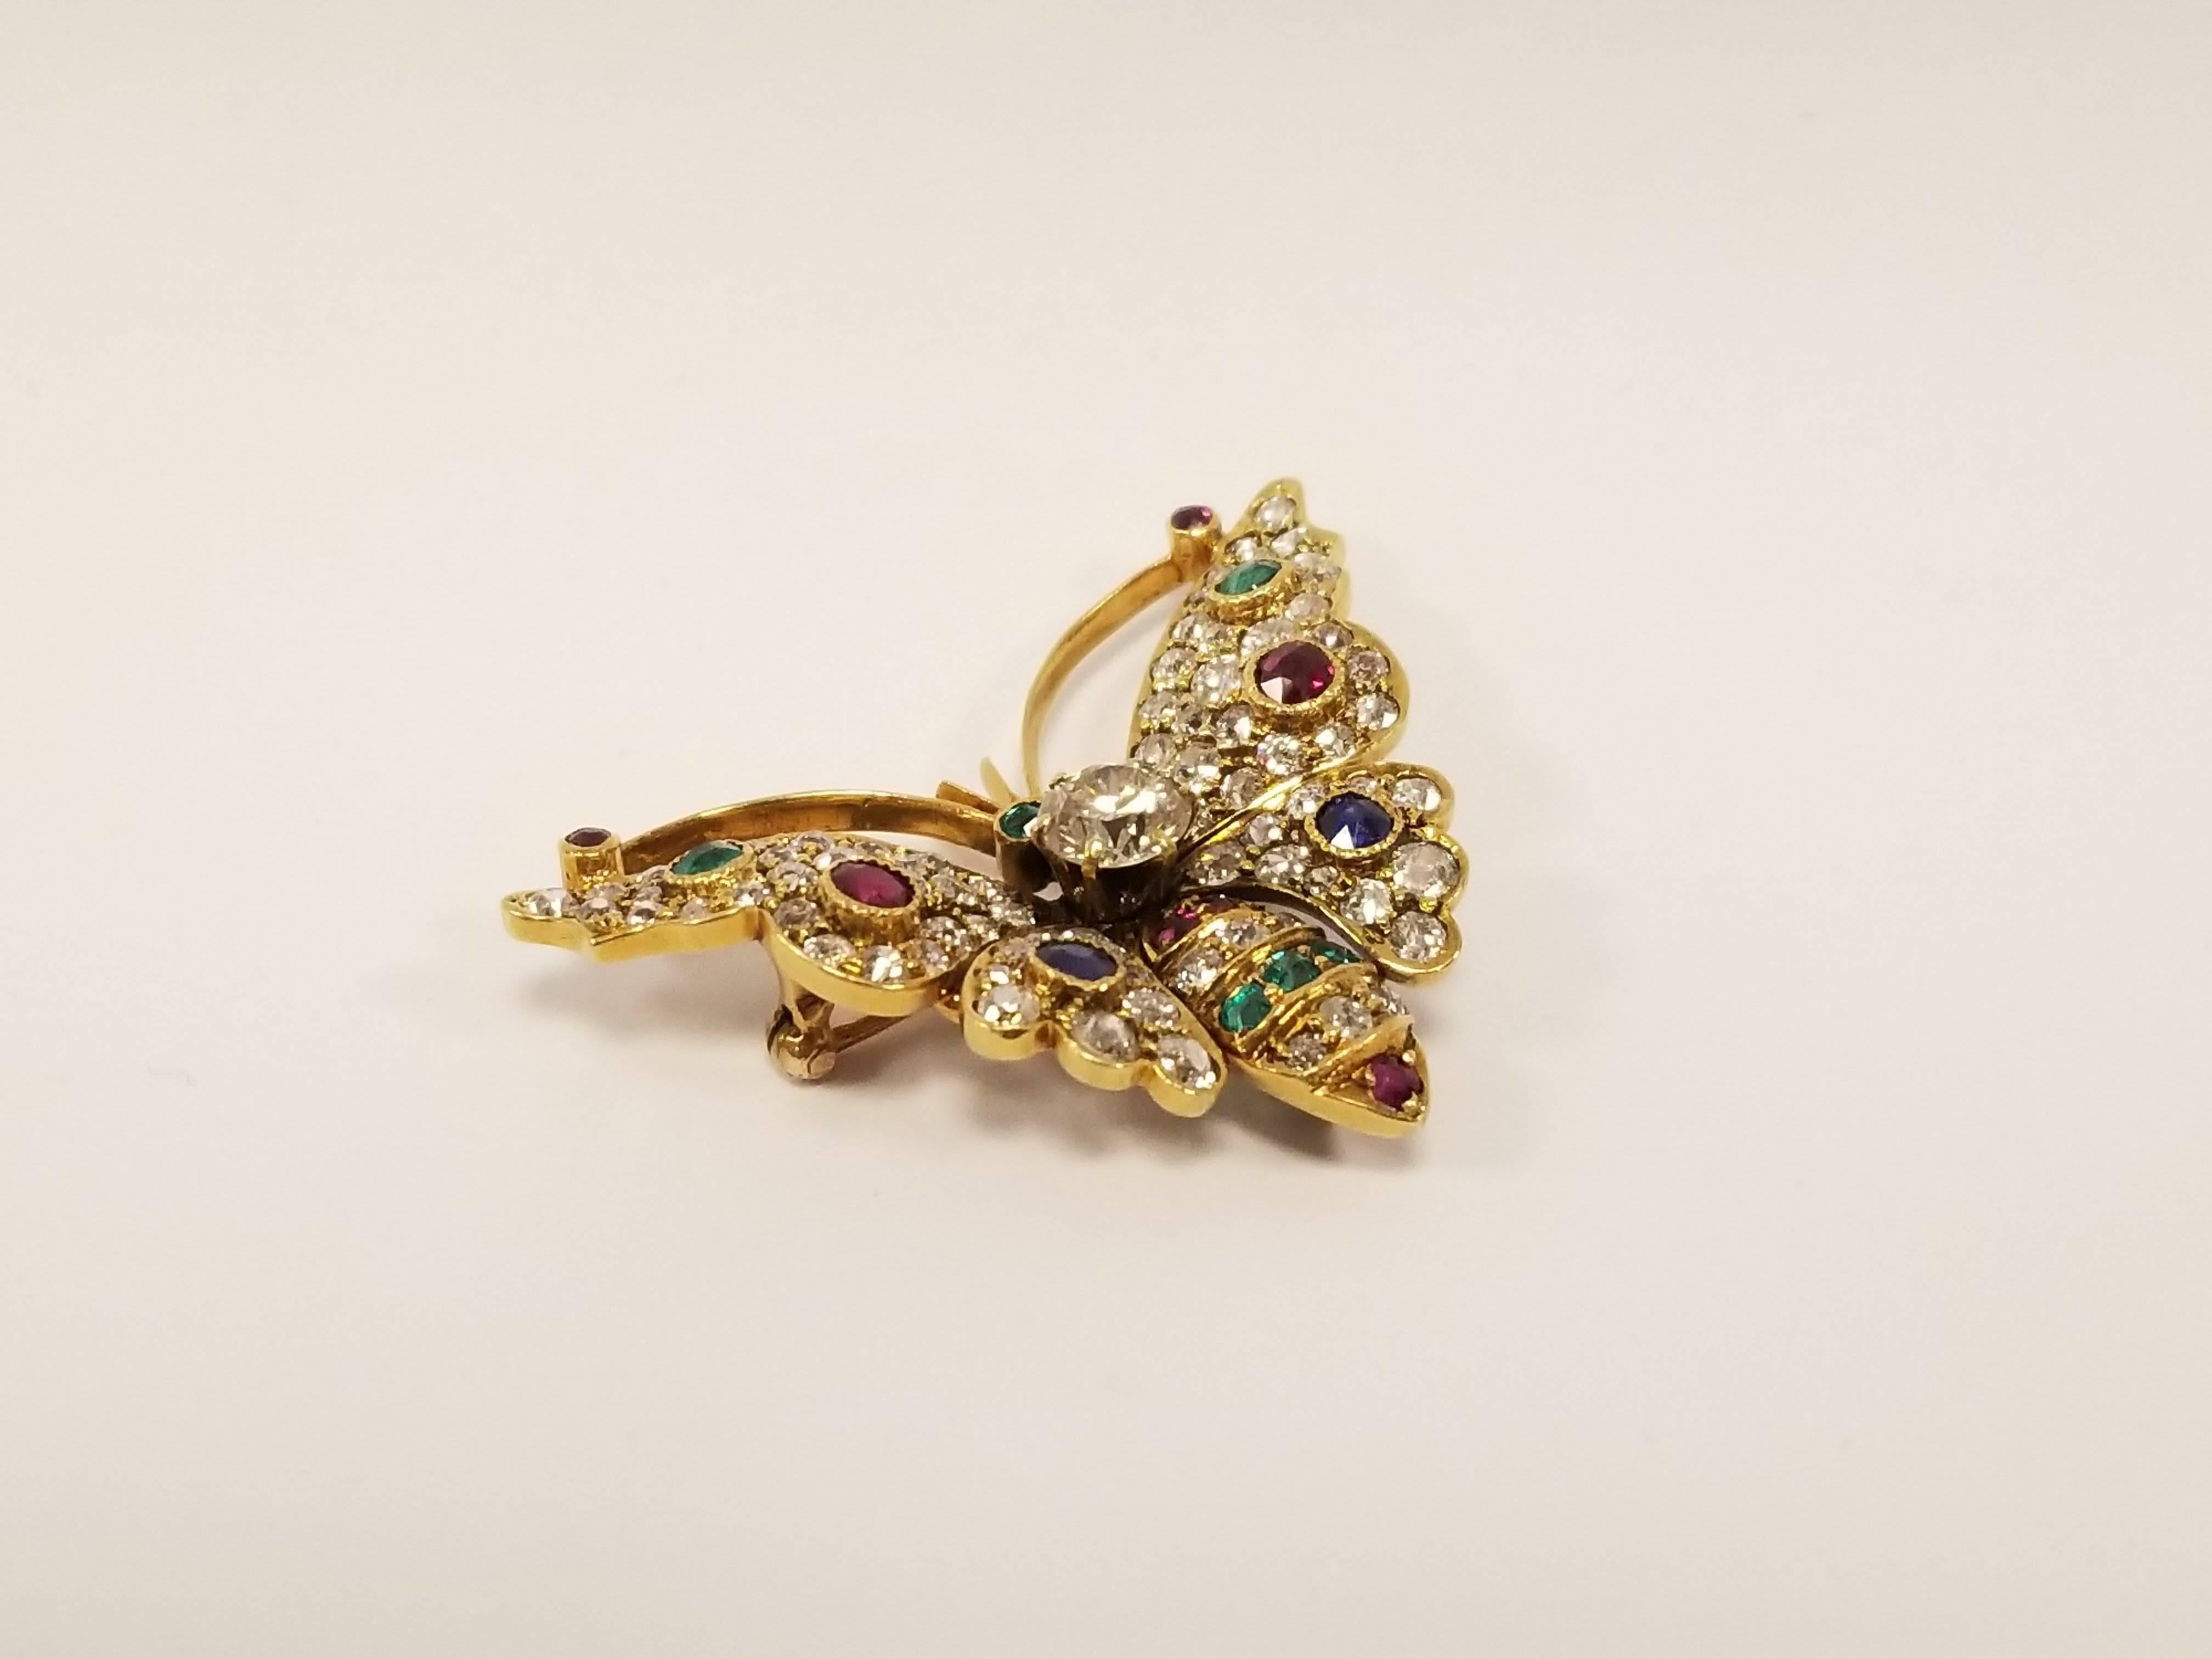 An Antique 18 karat gold butterfly brooch with diamonds,  emeralds, rubies and sapphires. The dimensional butterfly brooch centers on an old European-cut diamond with an approximate weight of 1.00 carat. The brooch has an additional 82 Old